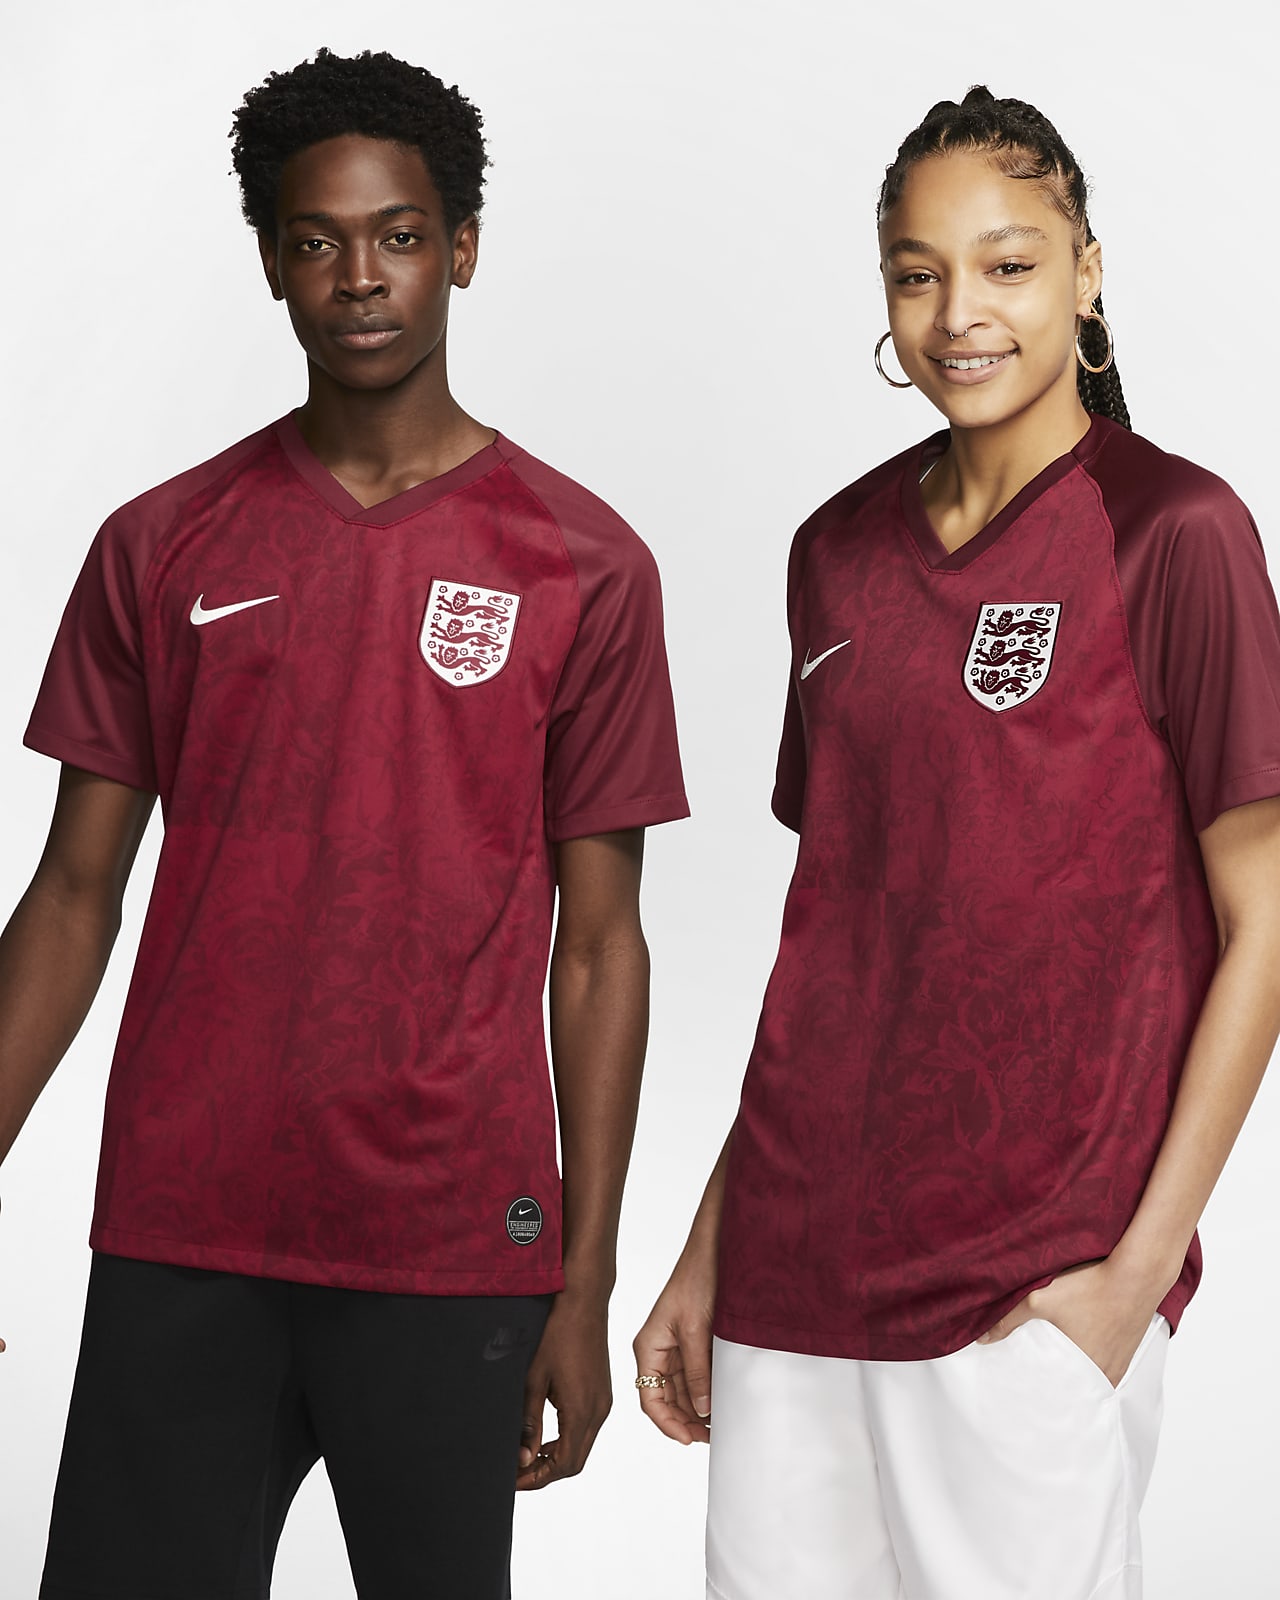 england lionesses jersey